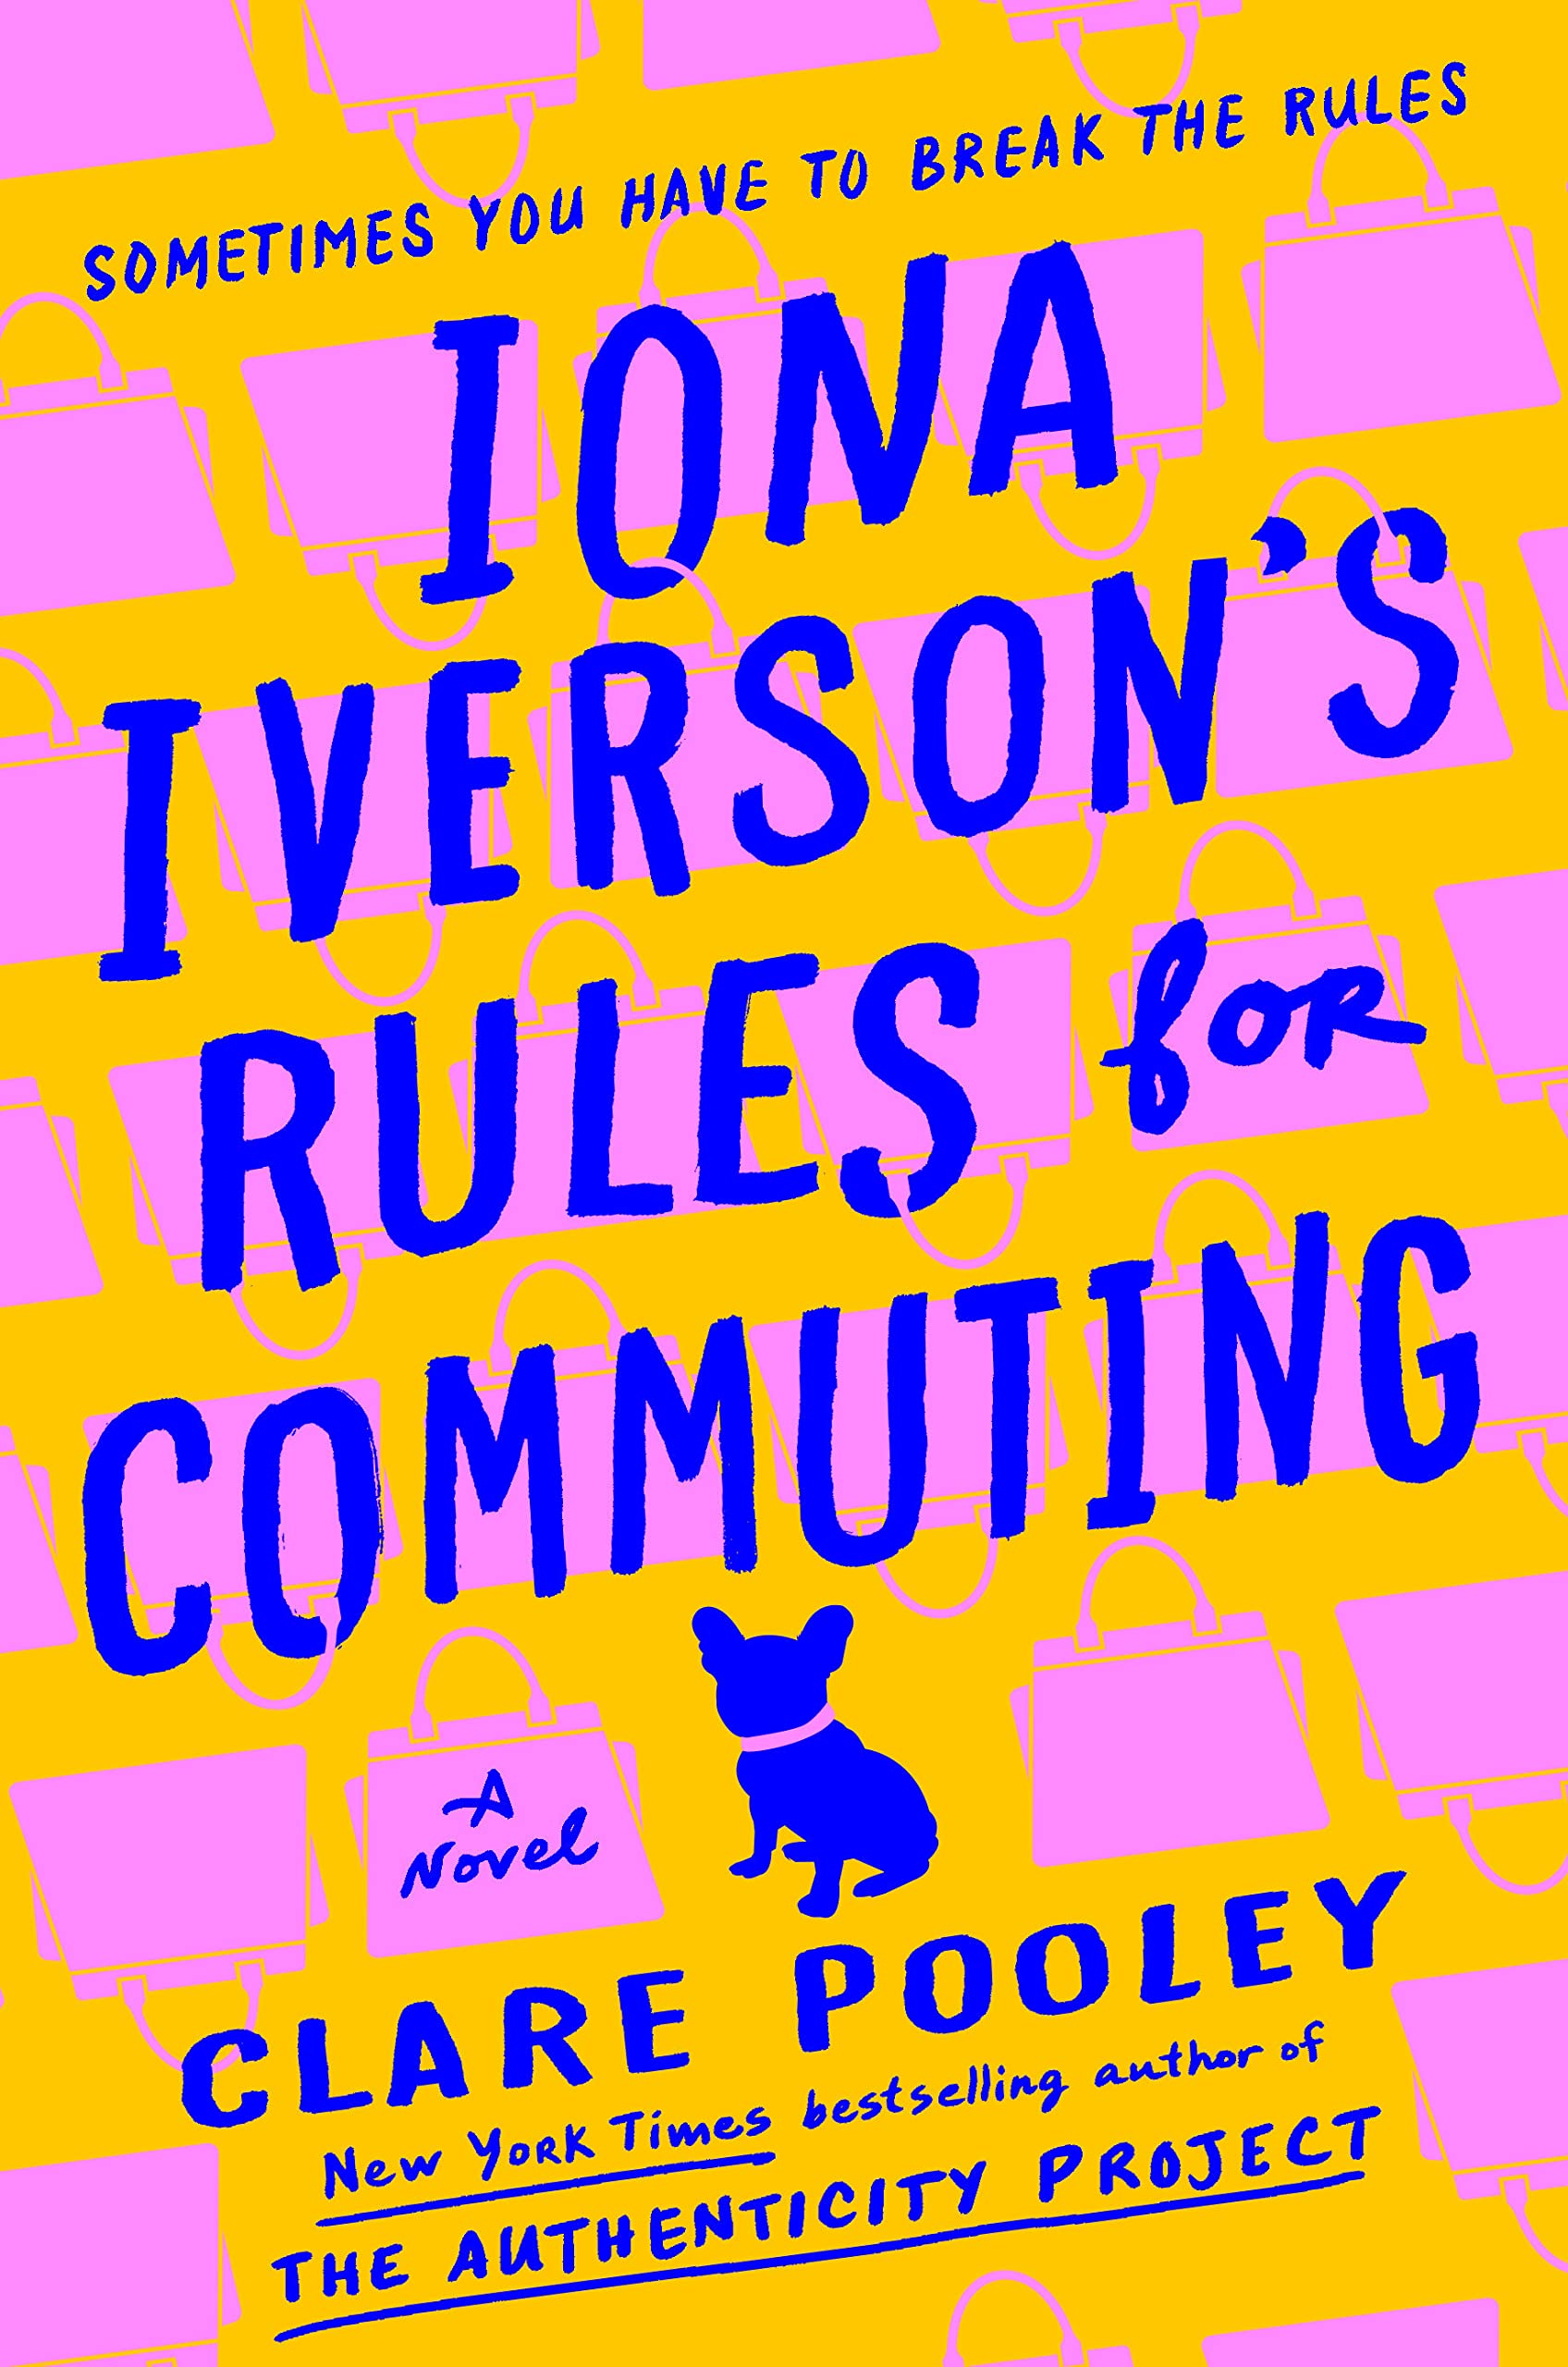 Image for "Iona Iverson's Rules for Commuting"